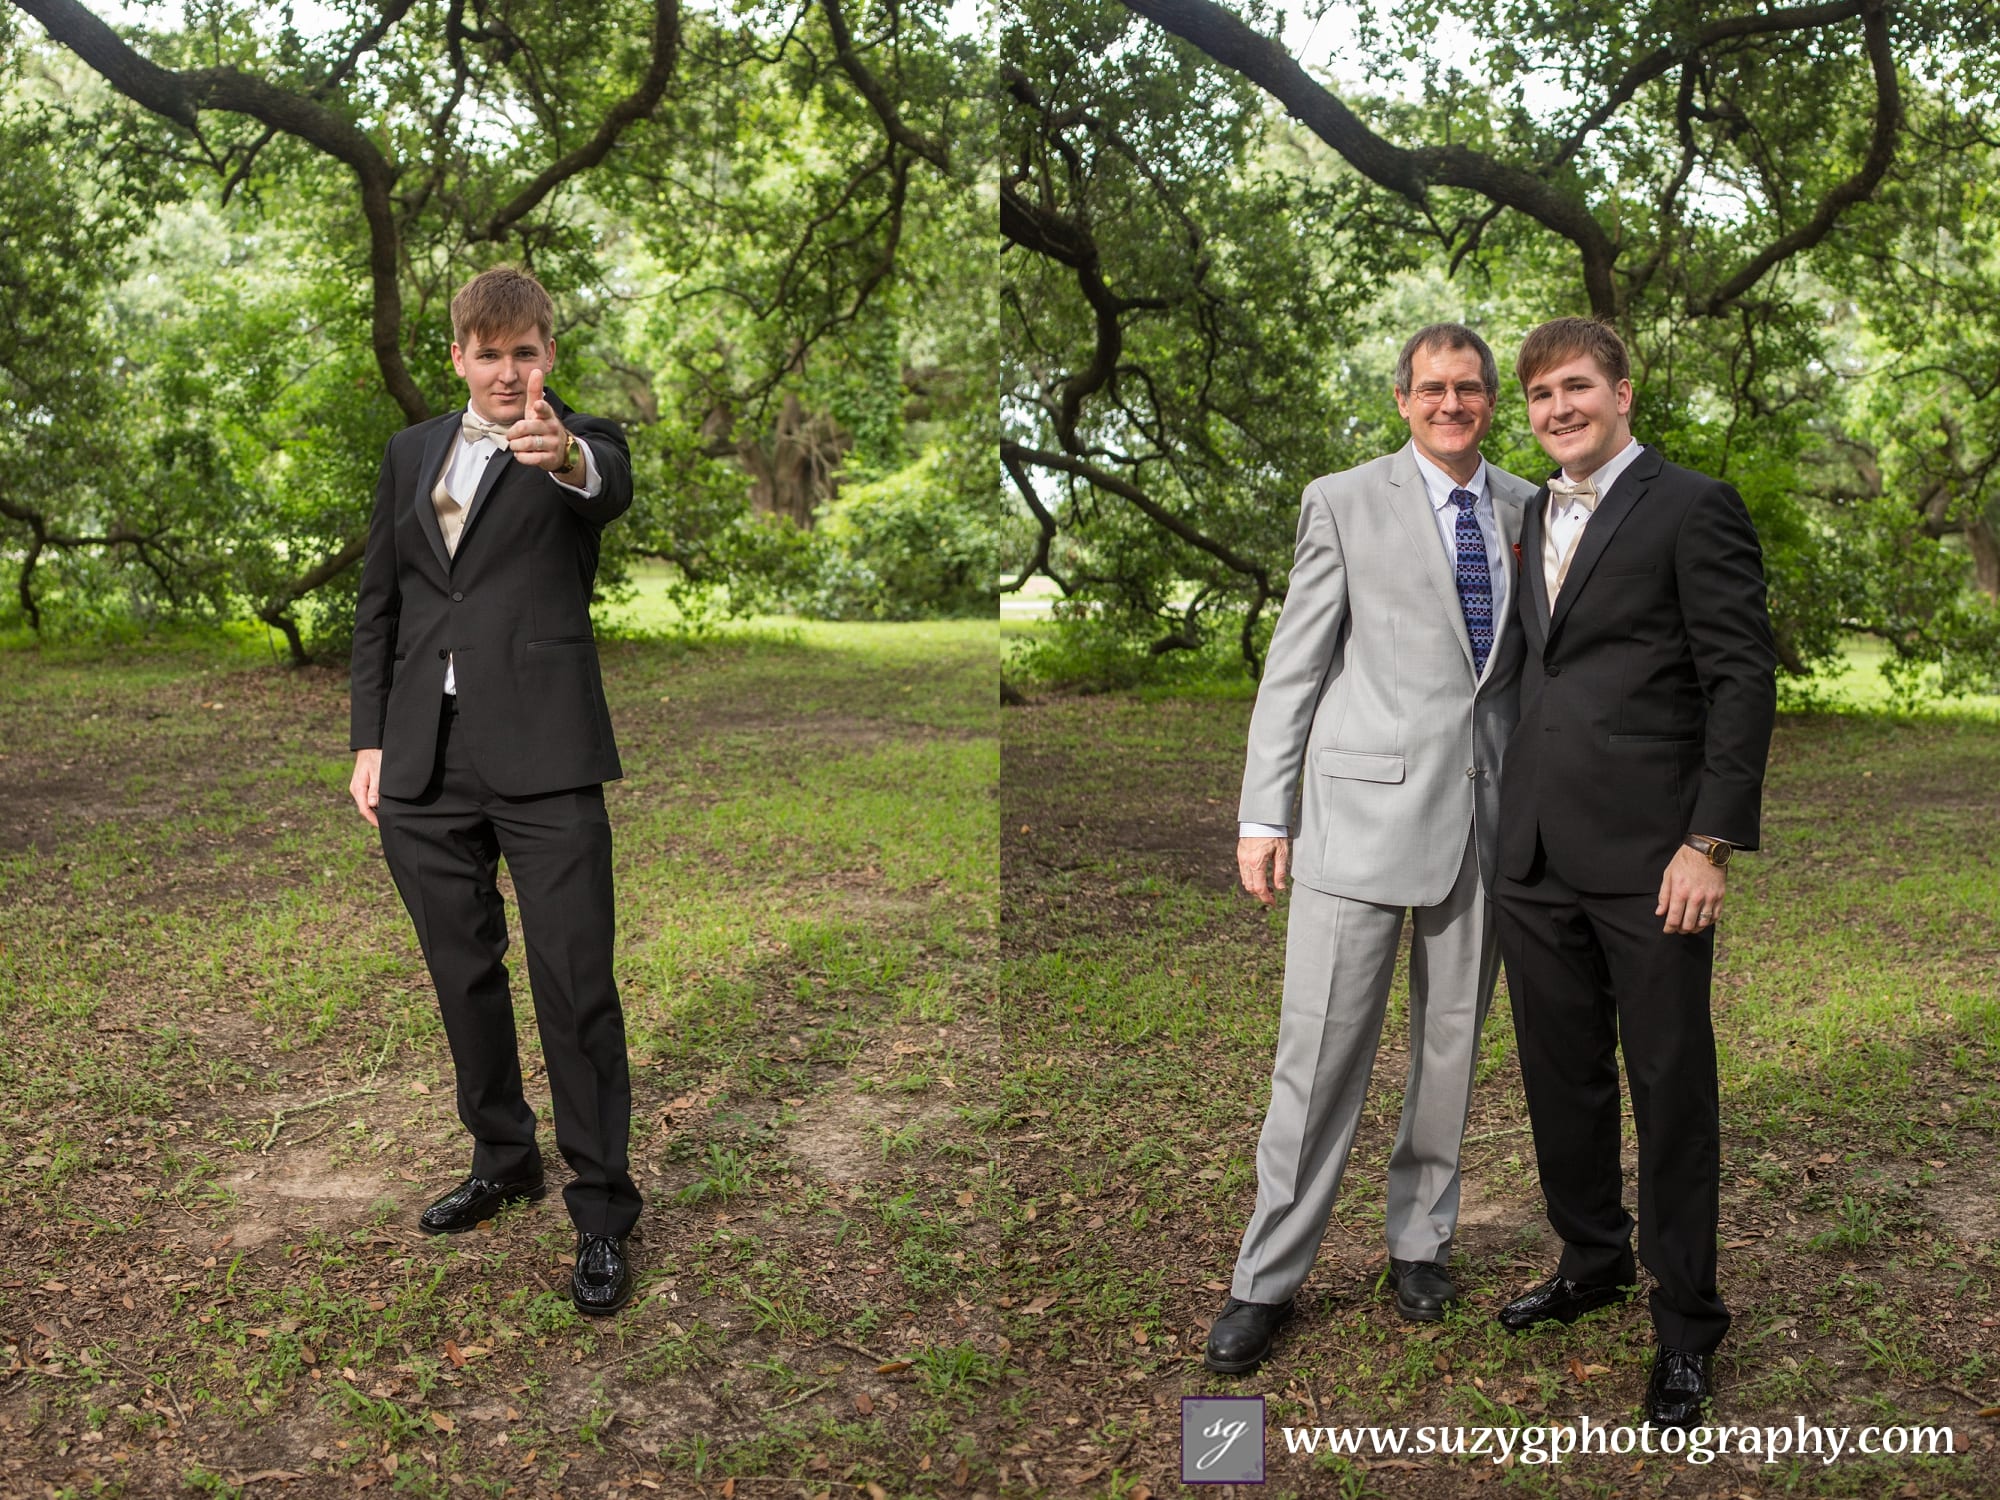 View More: http://suzygphotography.pass.us/emily--kevin-wedding